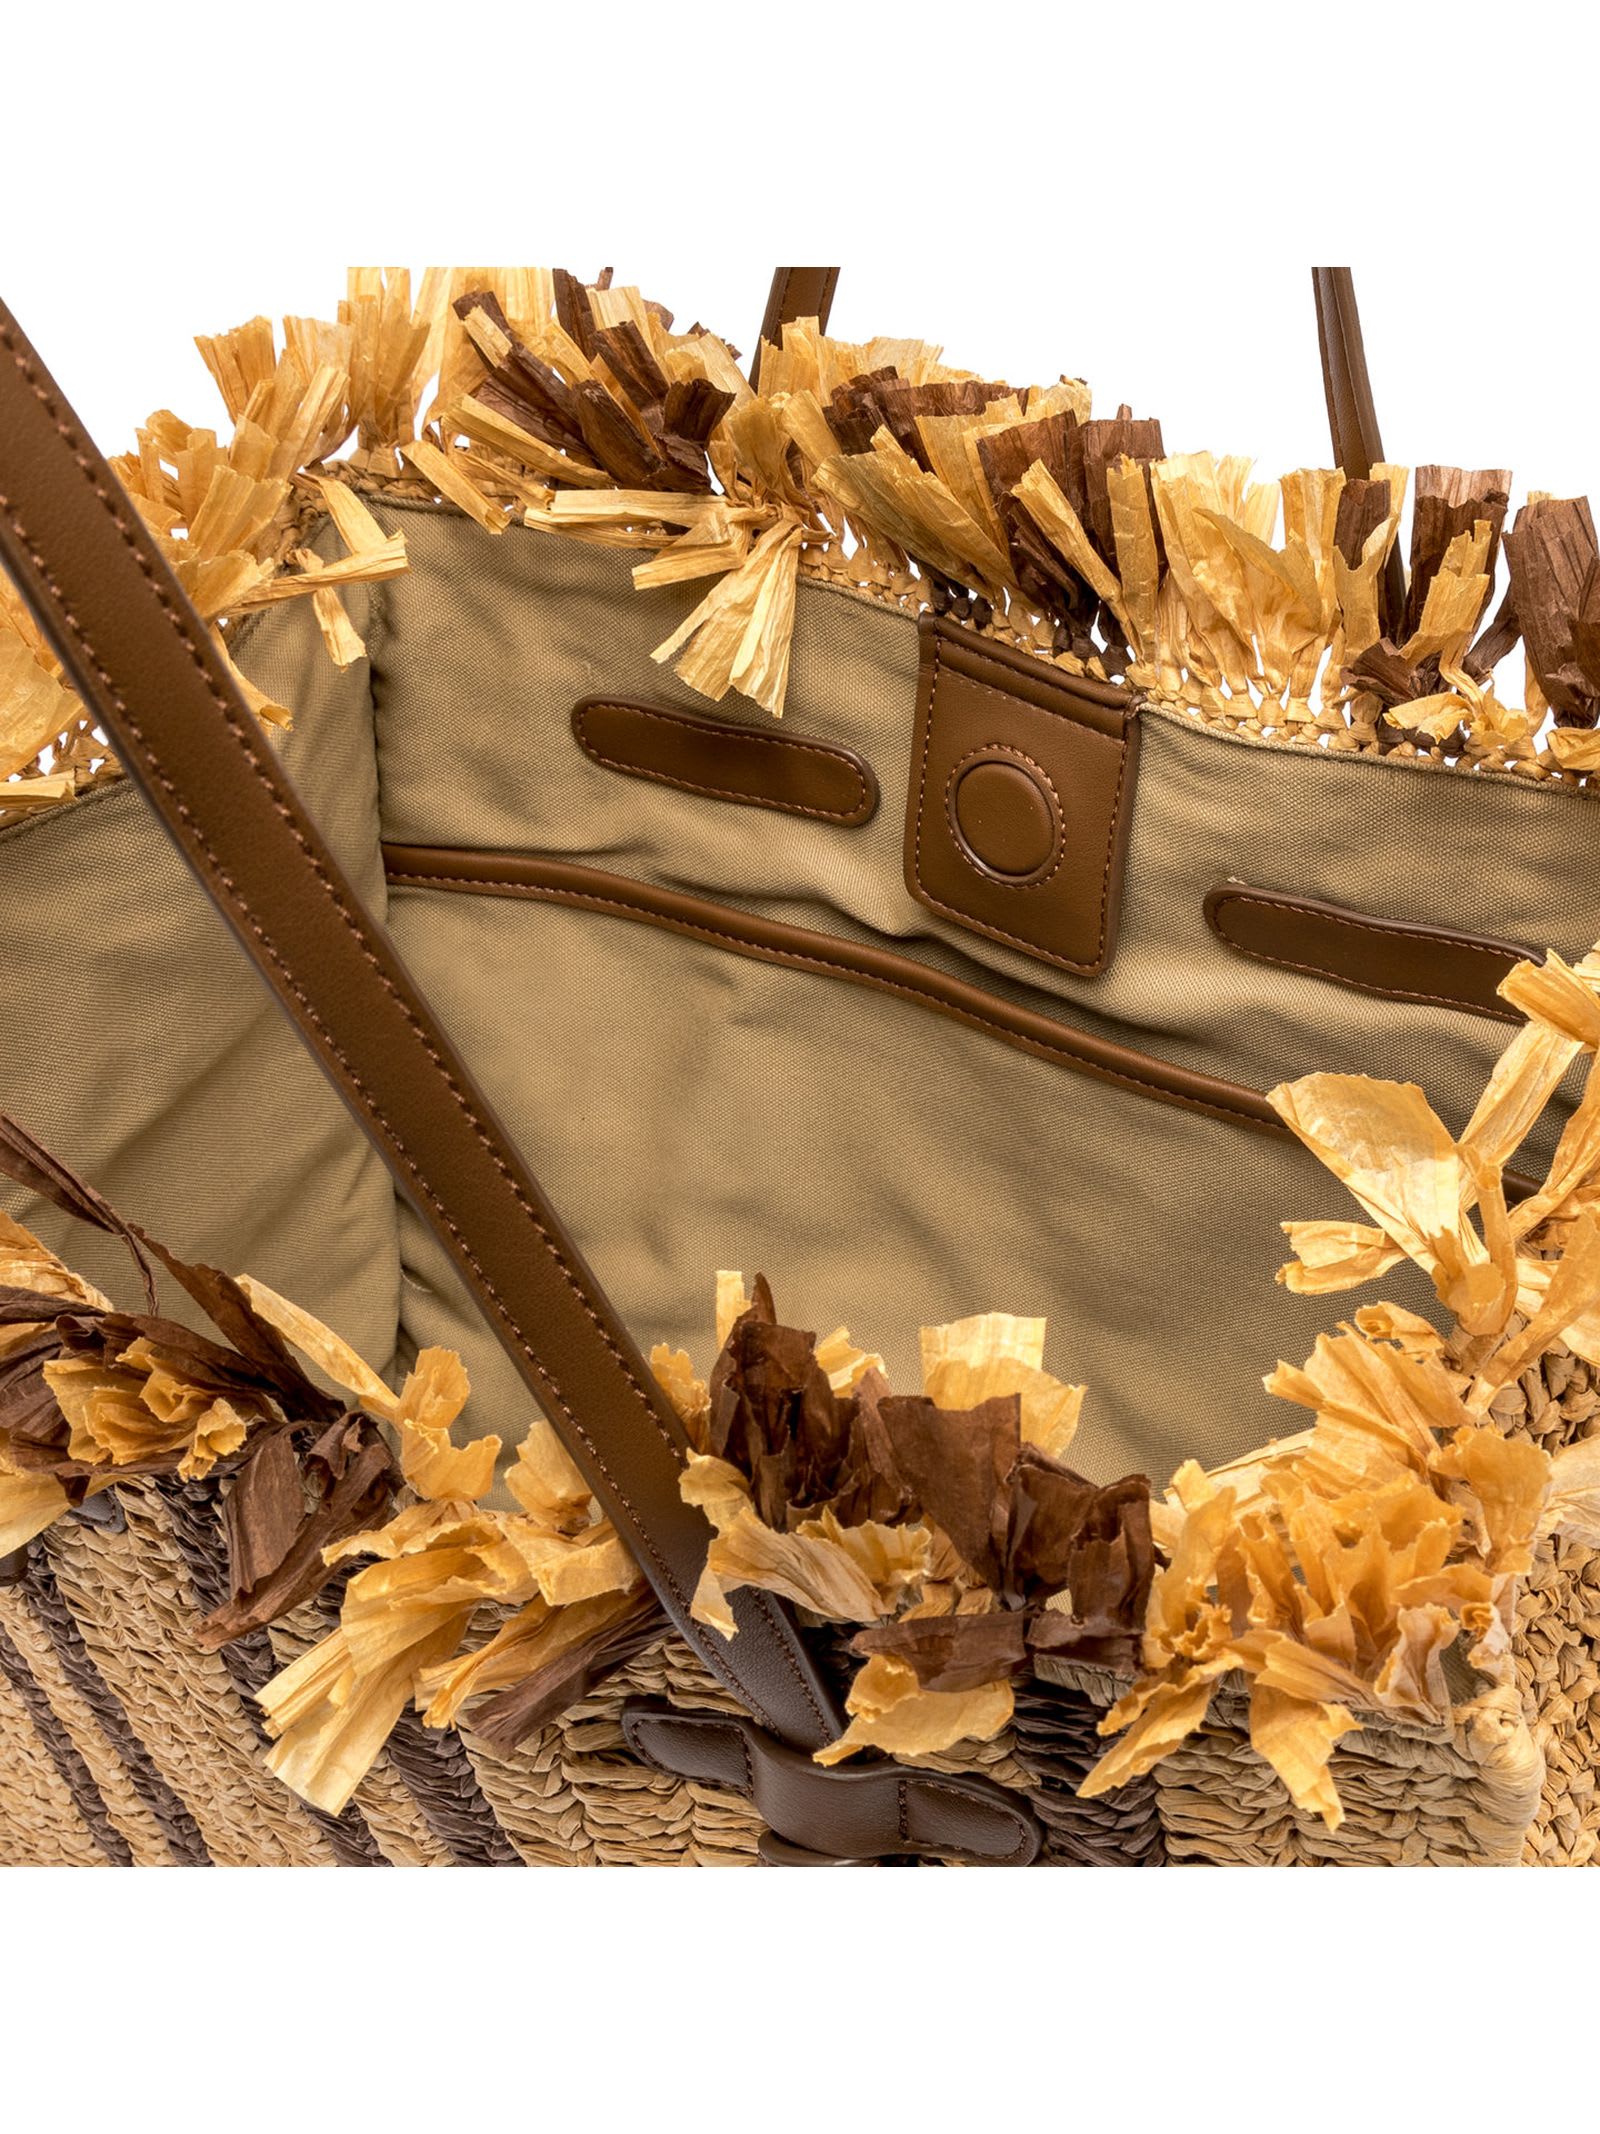 Shop Gianni Chiarini Shopping Bag Is Made Of Straw-effect Material In Brown